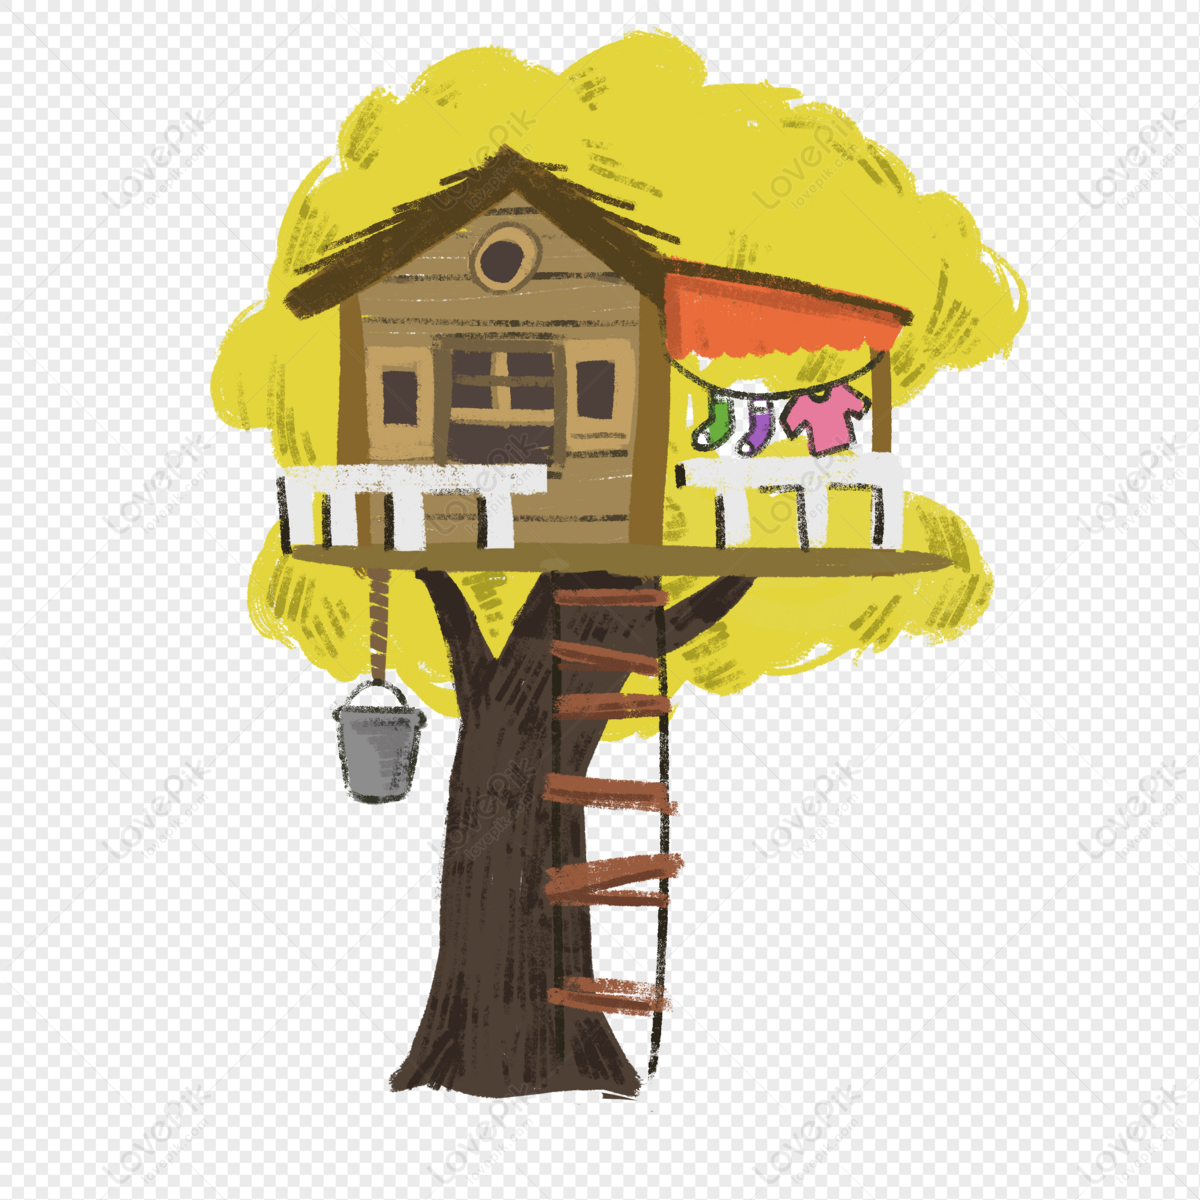 Cartoon Tree House On Yellow Trees PNG Hd Transparent Image And Clipart  Image For Free Download - Lovepik | 401549694